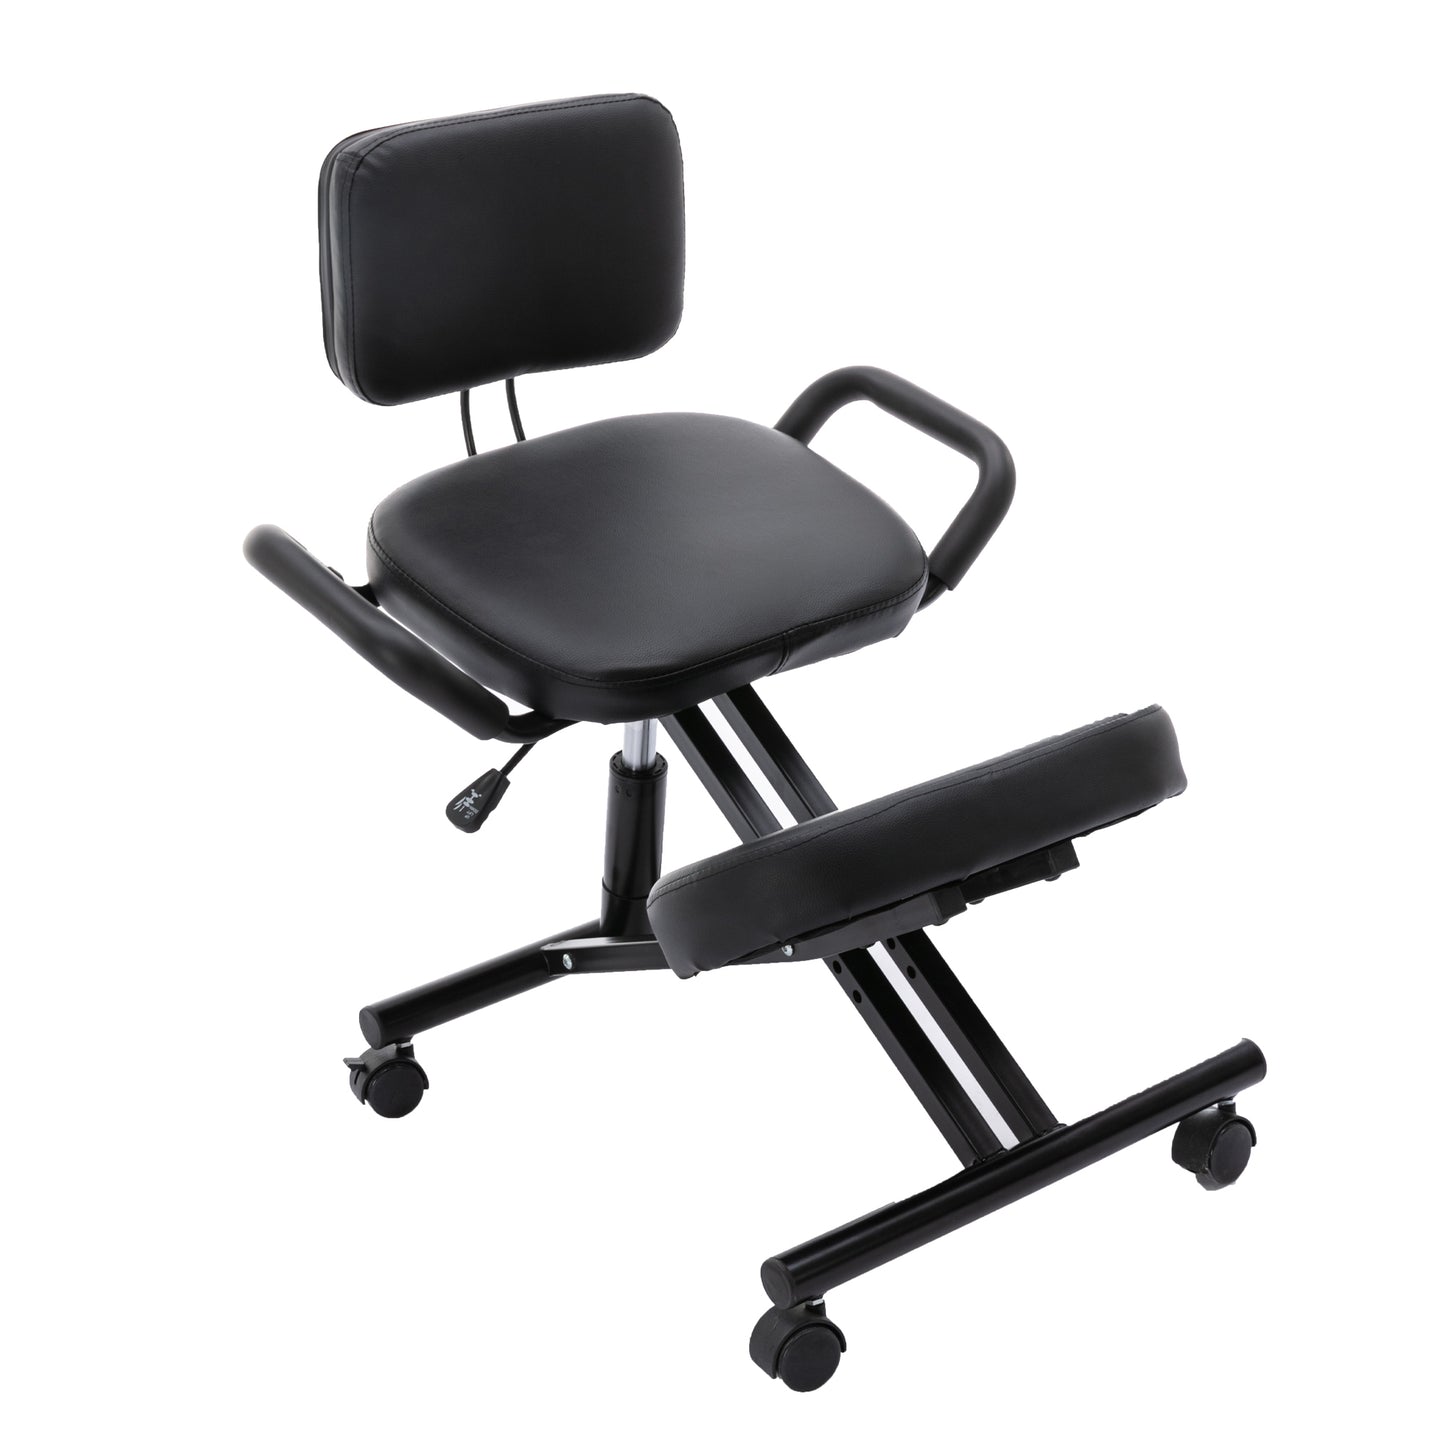 HengMing Ergonomic Kneeling Chair, Office Home Chair with Adjustable Height for Posture Correct, Bad Backs & Neck Pain Relieving, Spine Tension Relief-Thick Comfortable Cushion,Black